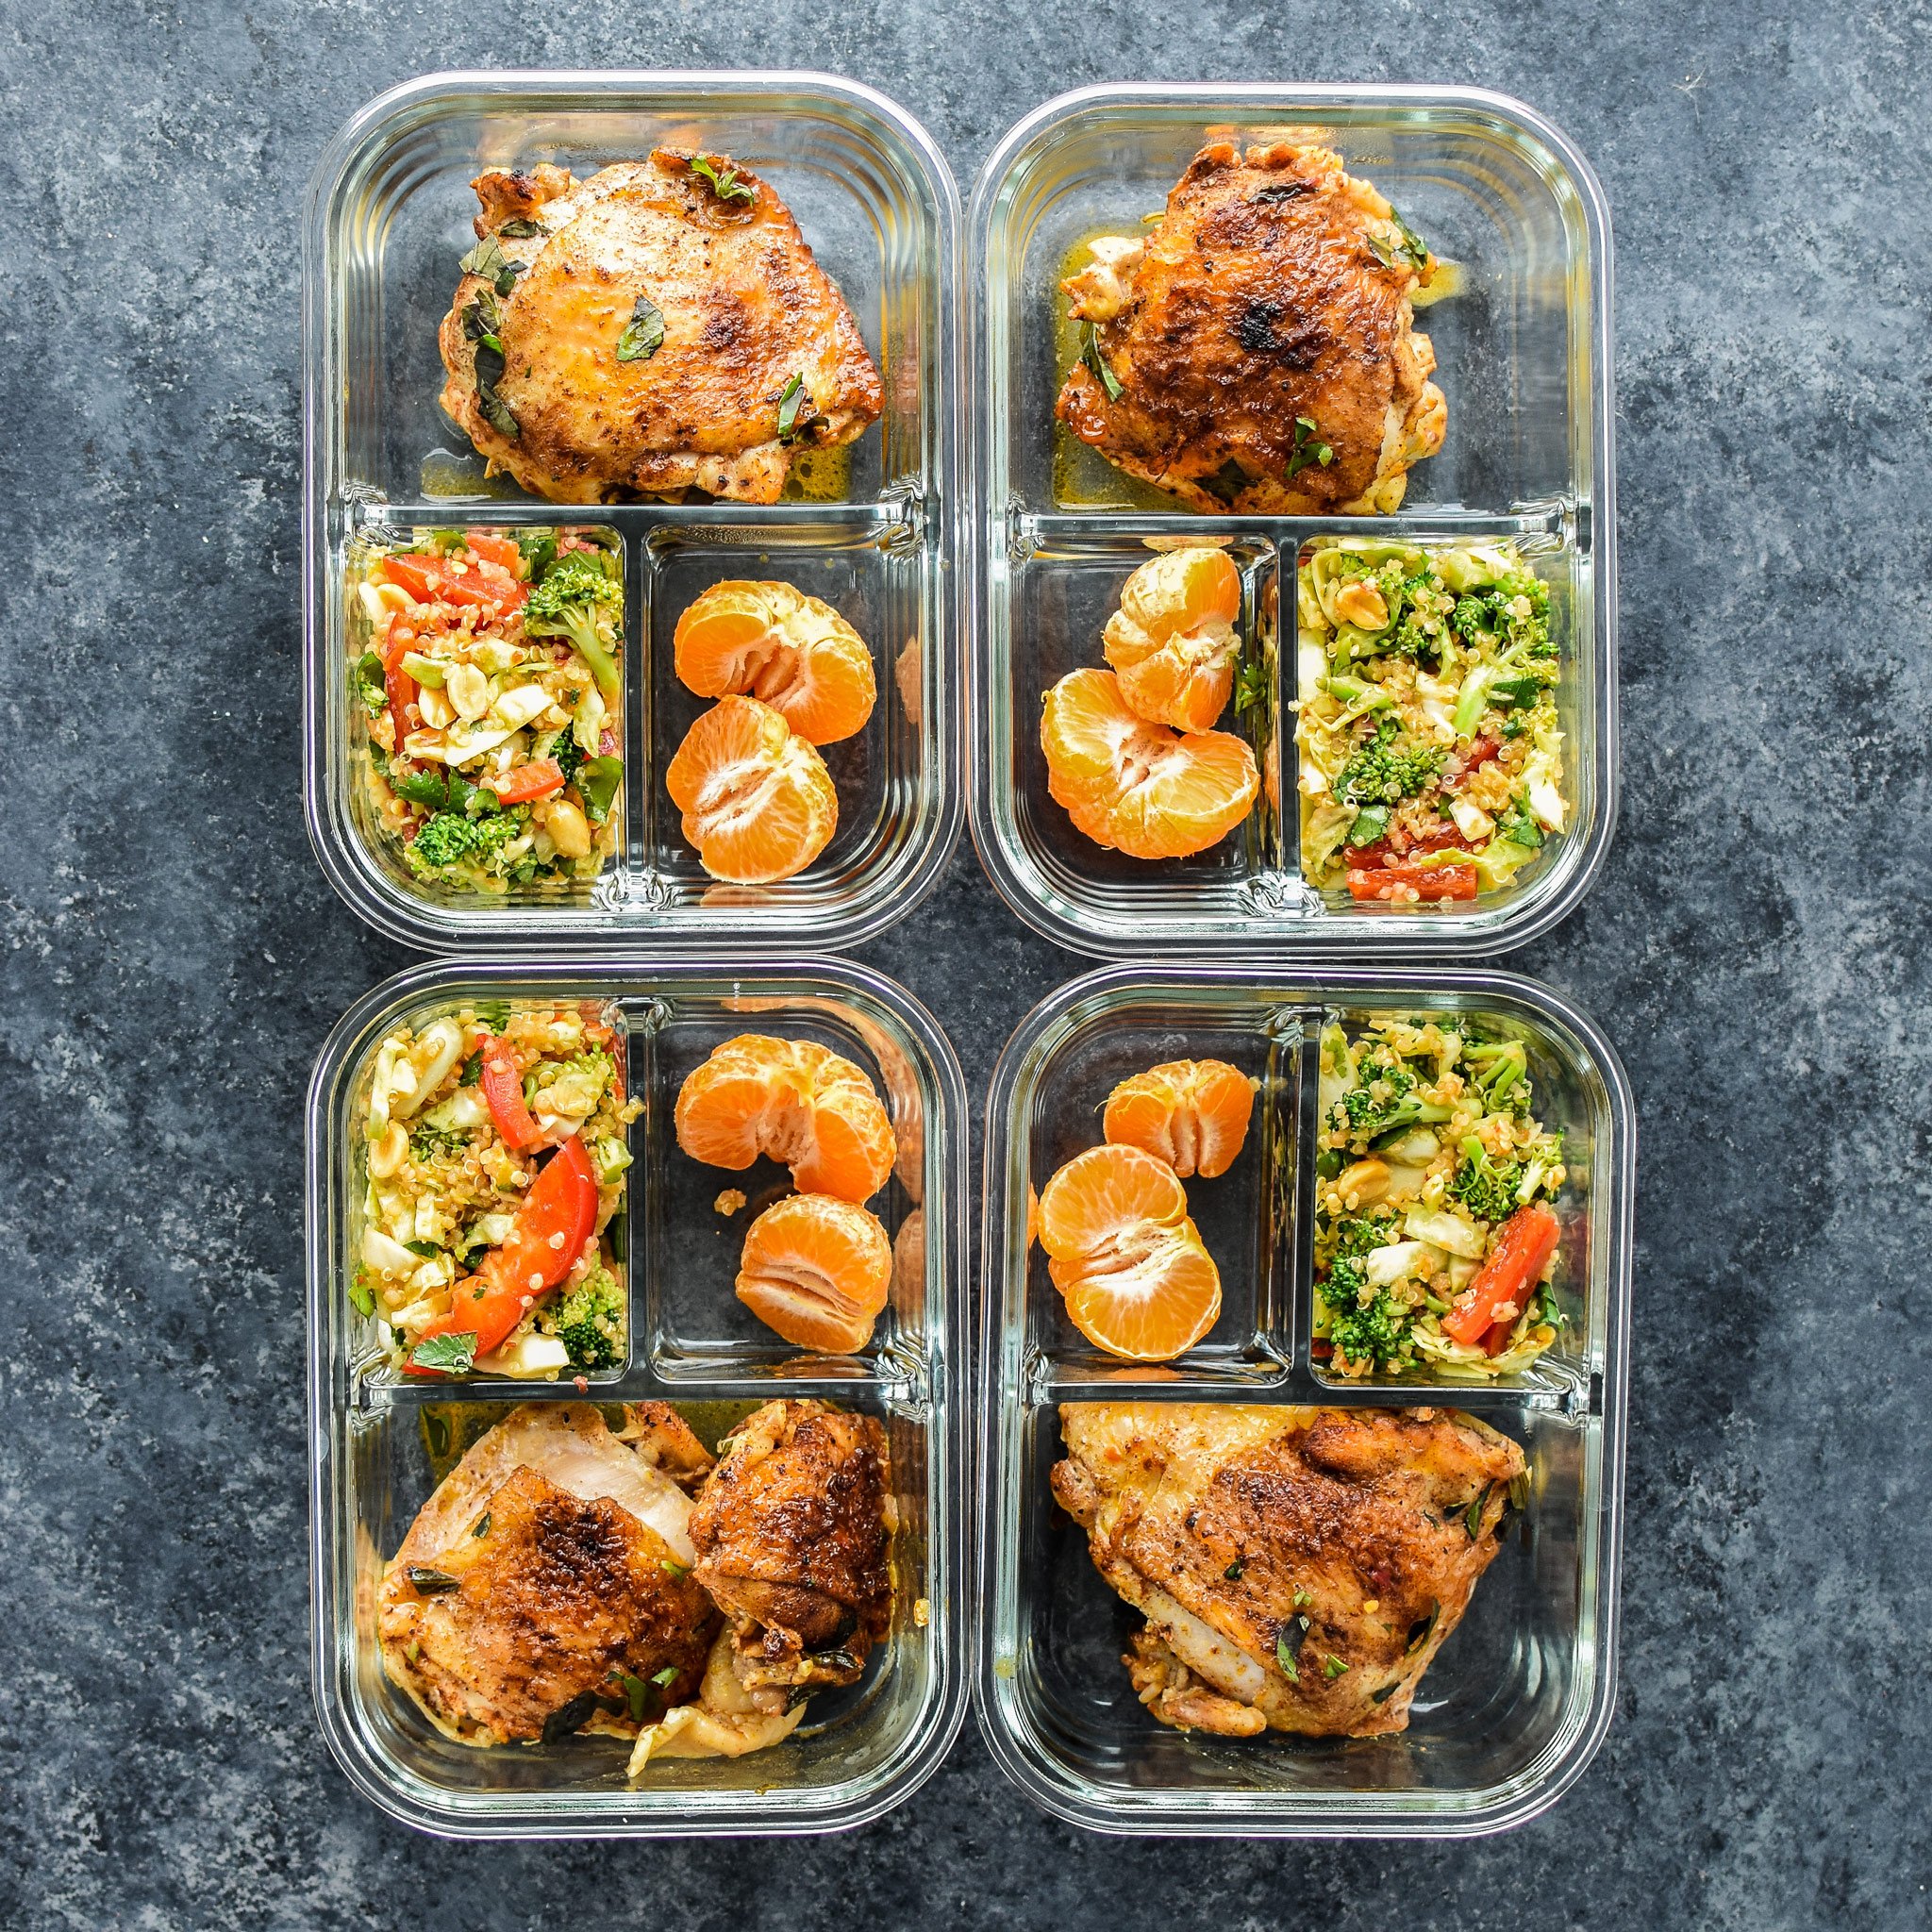 Meal prepped chicken thighs with asian quinoa salad and mandarins.